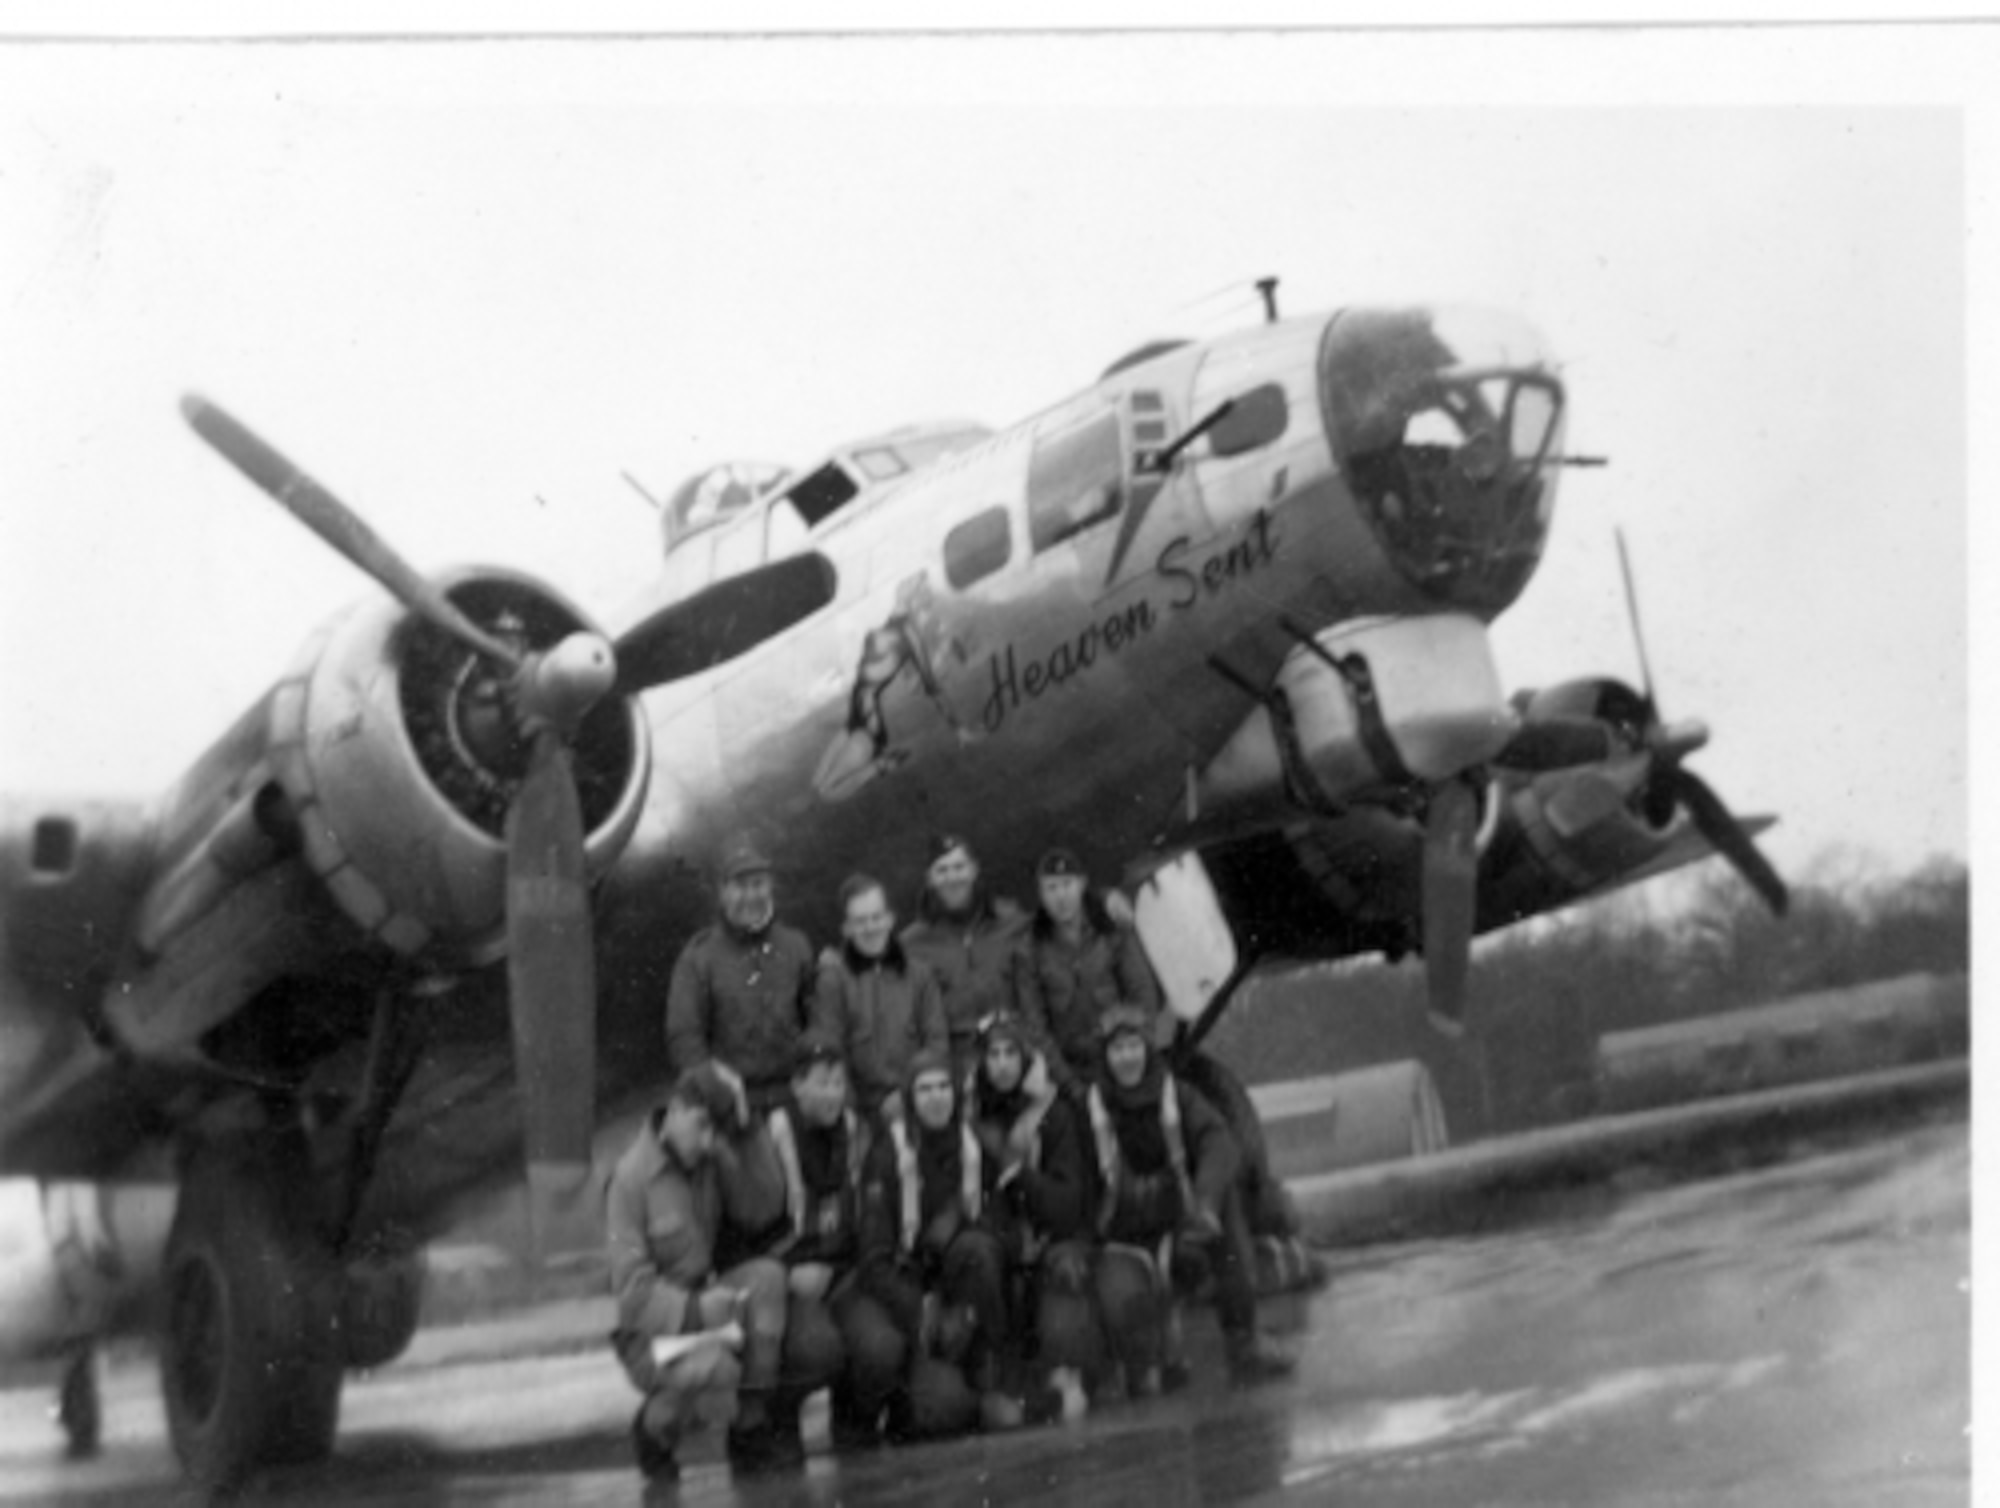 The crew of B-17 Flying Fortress "Heaven Sent" gather for a photograph with their aircraft immediately after landing from a mission over Germany during World War II. Back in 1944, Sept. 11 also brought tragedy when the 100th Bomb Group, from Thorpe Abbots, England, sent up its usual 36 aircraft. Thirteen of those were from the 350th BS; all 13 got shot down. (Courtesy photo provided by 100th Bomb Group Foundation/Released)